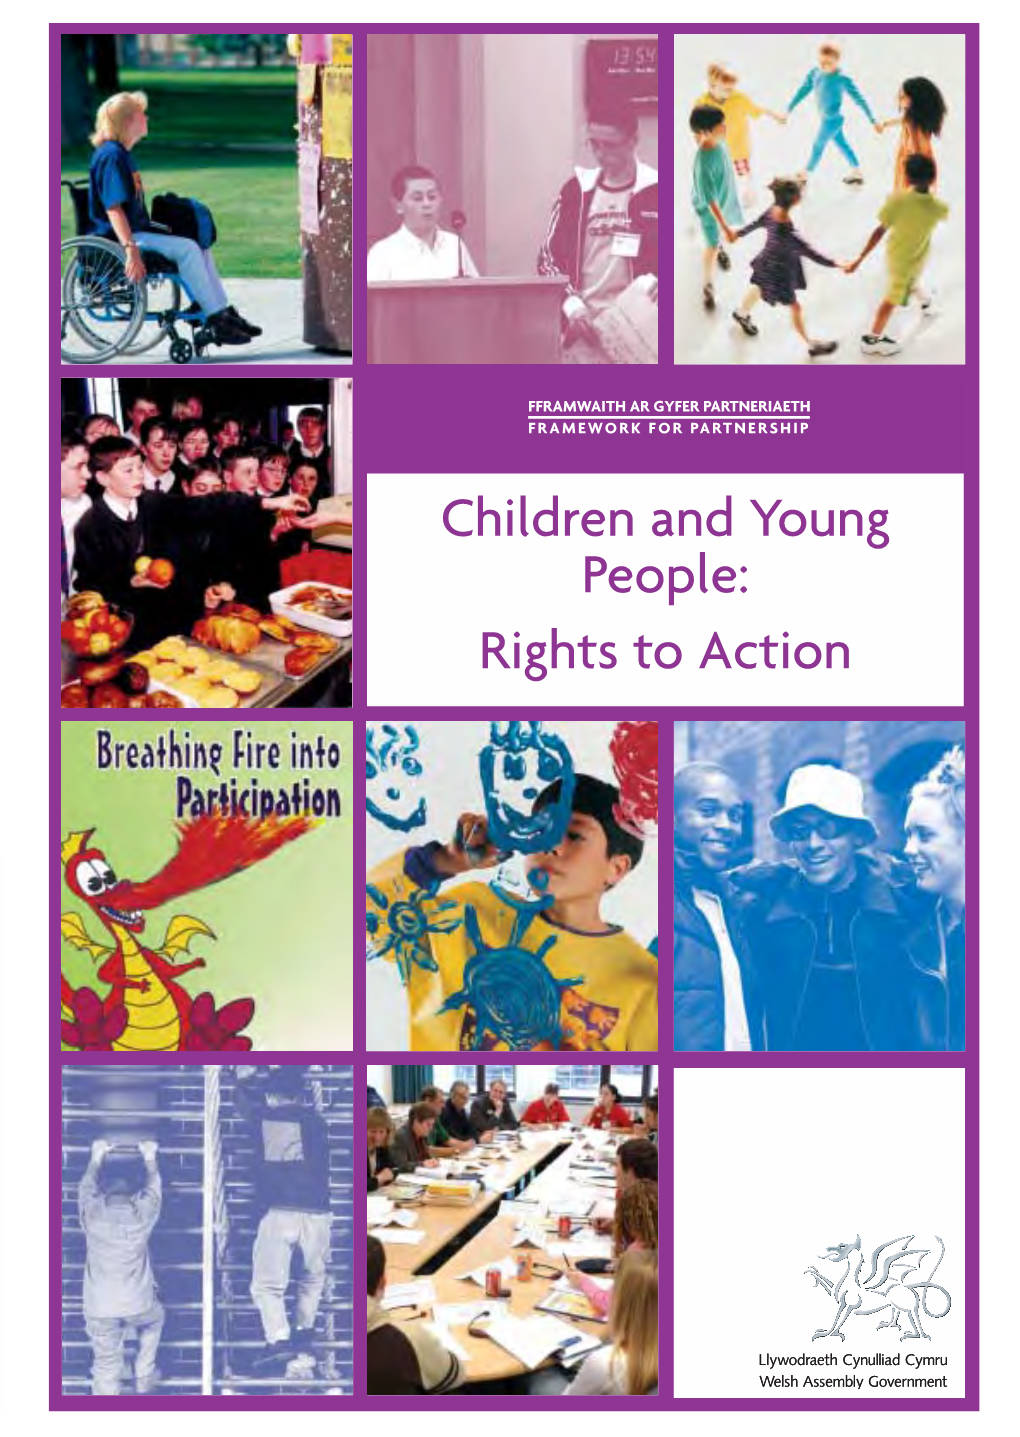 Children and Young People: Rights to Action